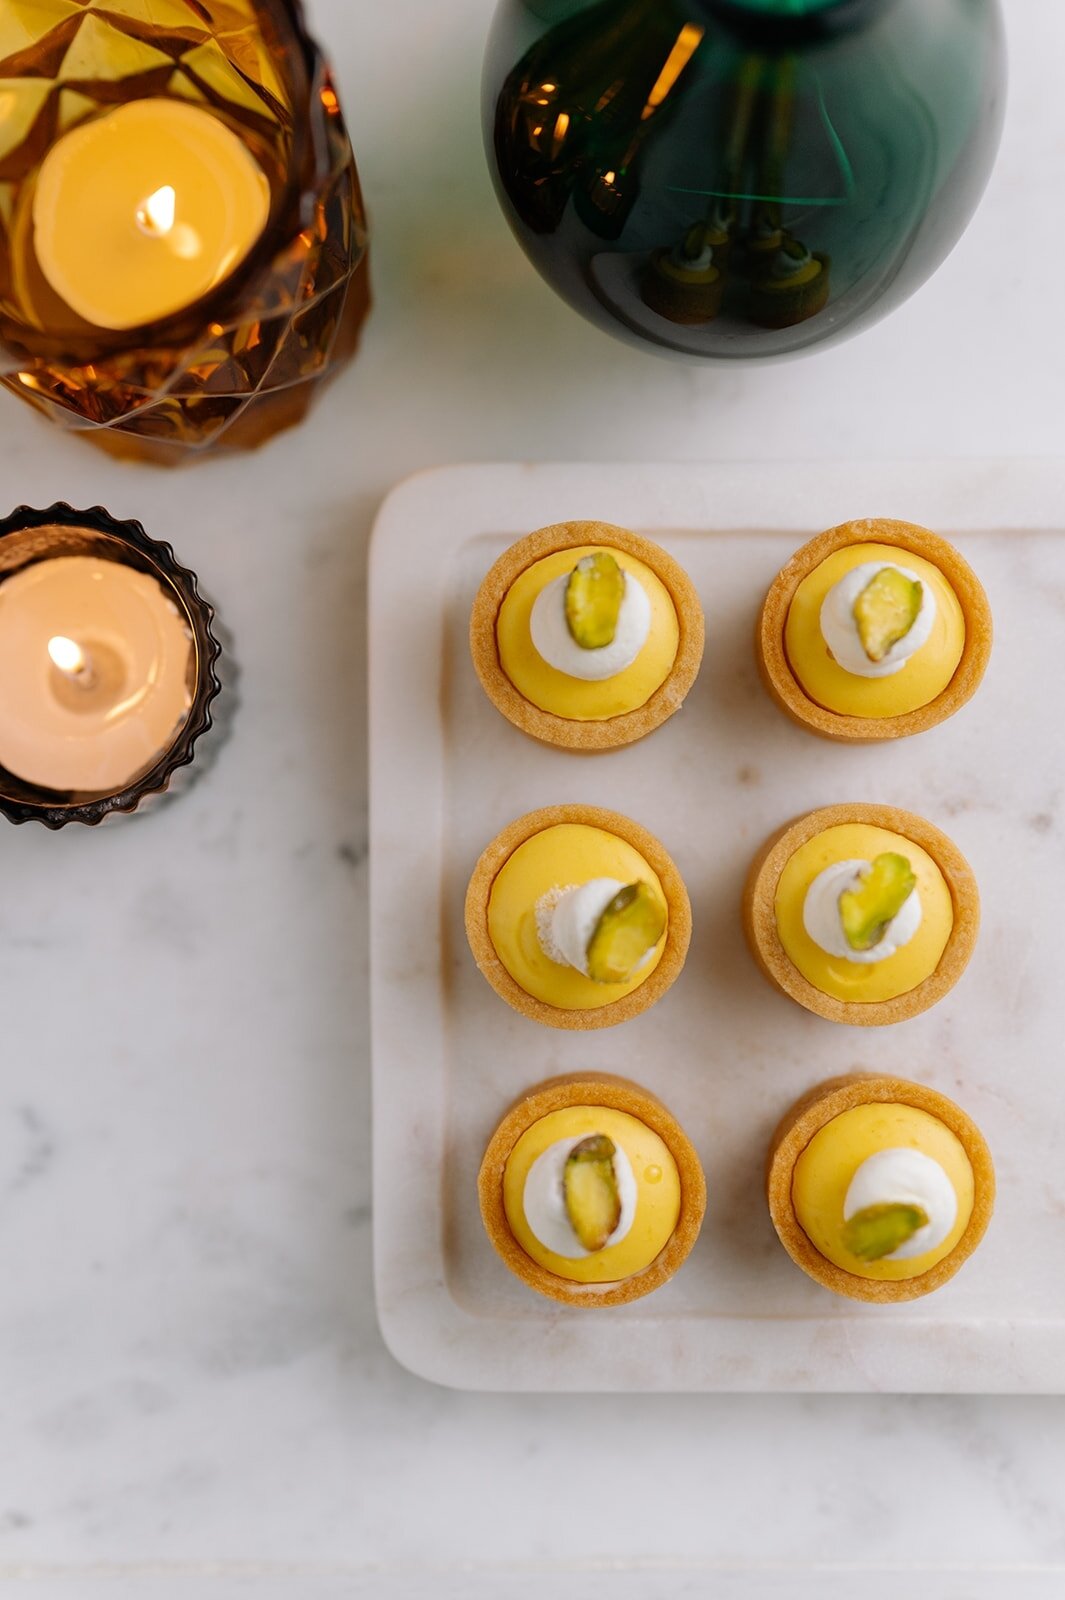 A super cute custom petite dessert crafted for a Indian Fusion Menu:​​​​​​​​
Petite Mango Tart​​​​​​​​
Chantilly, candied pistachio​​​​​​​​
..​​​​​​​​
Connect with our events team at events@edgecatering.ca to customize your own menu for your next Edg